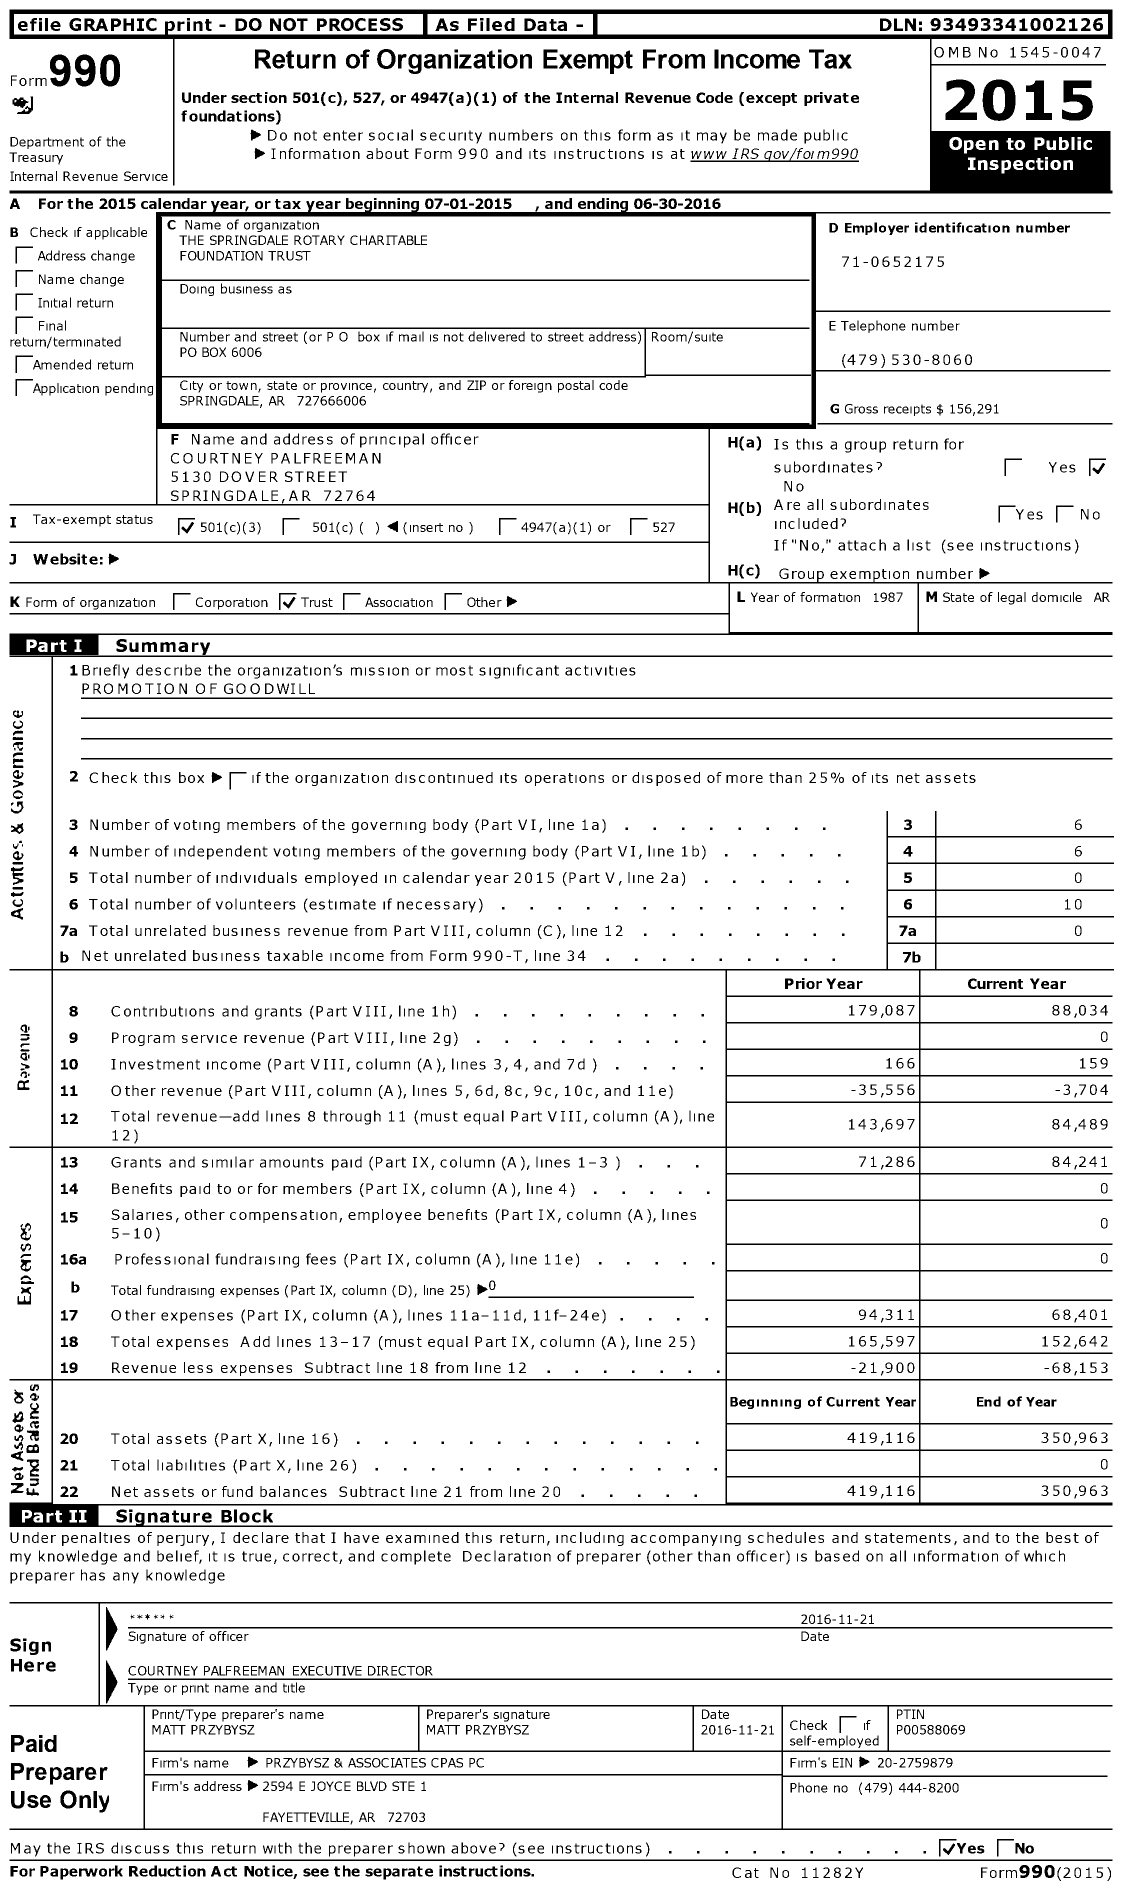 Image of first page of 2015 Form 990 for The Springdale Rotary Charitable Foundation Trust